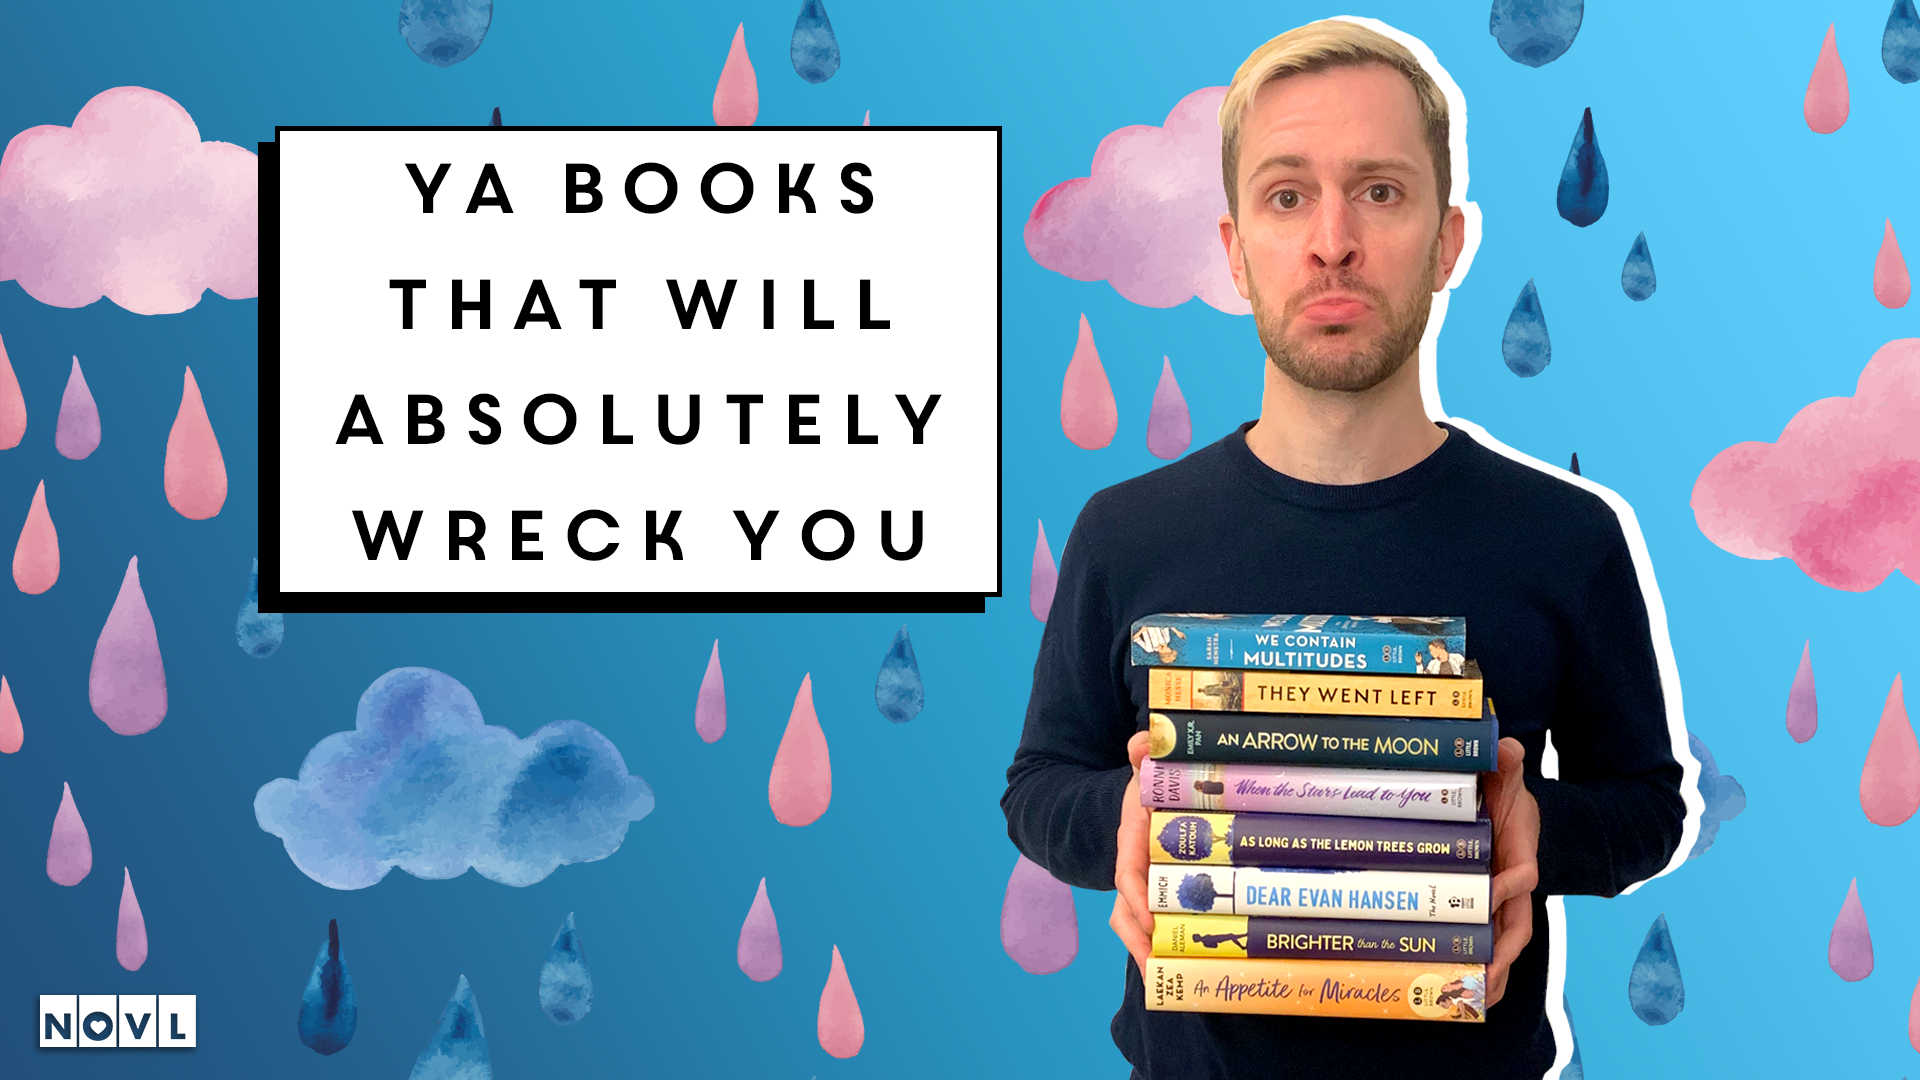 NOVL Blog - YA Books That Will Absolutely Wreck You